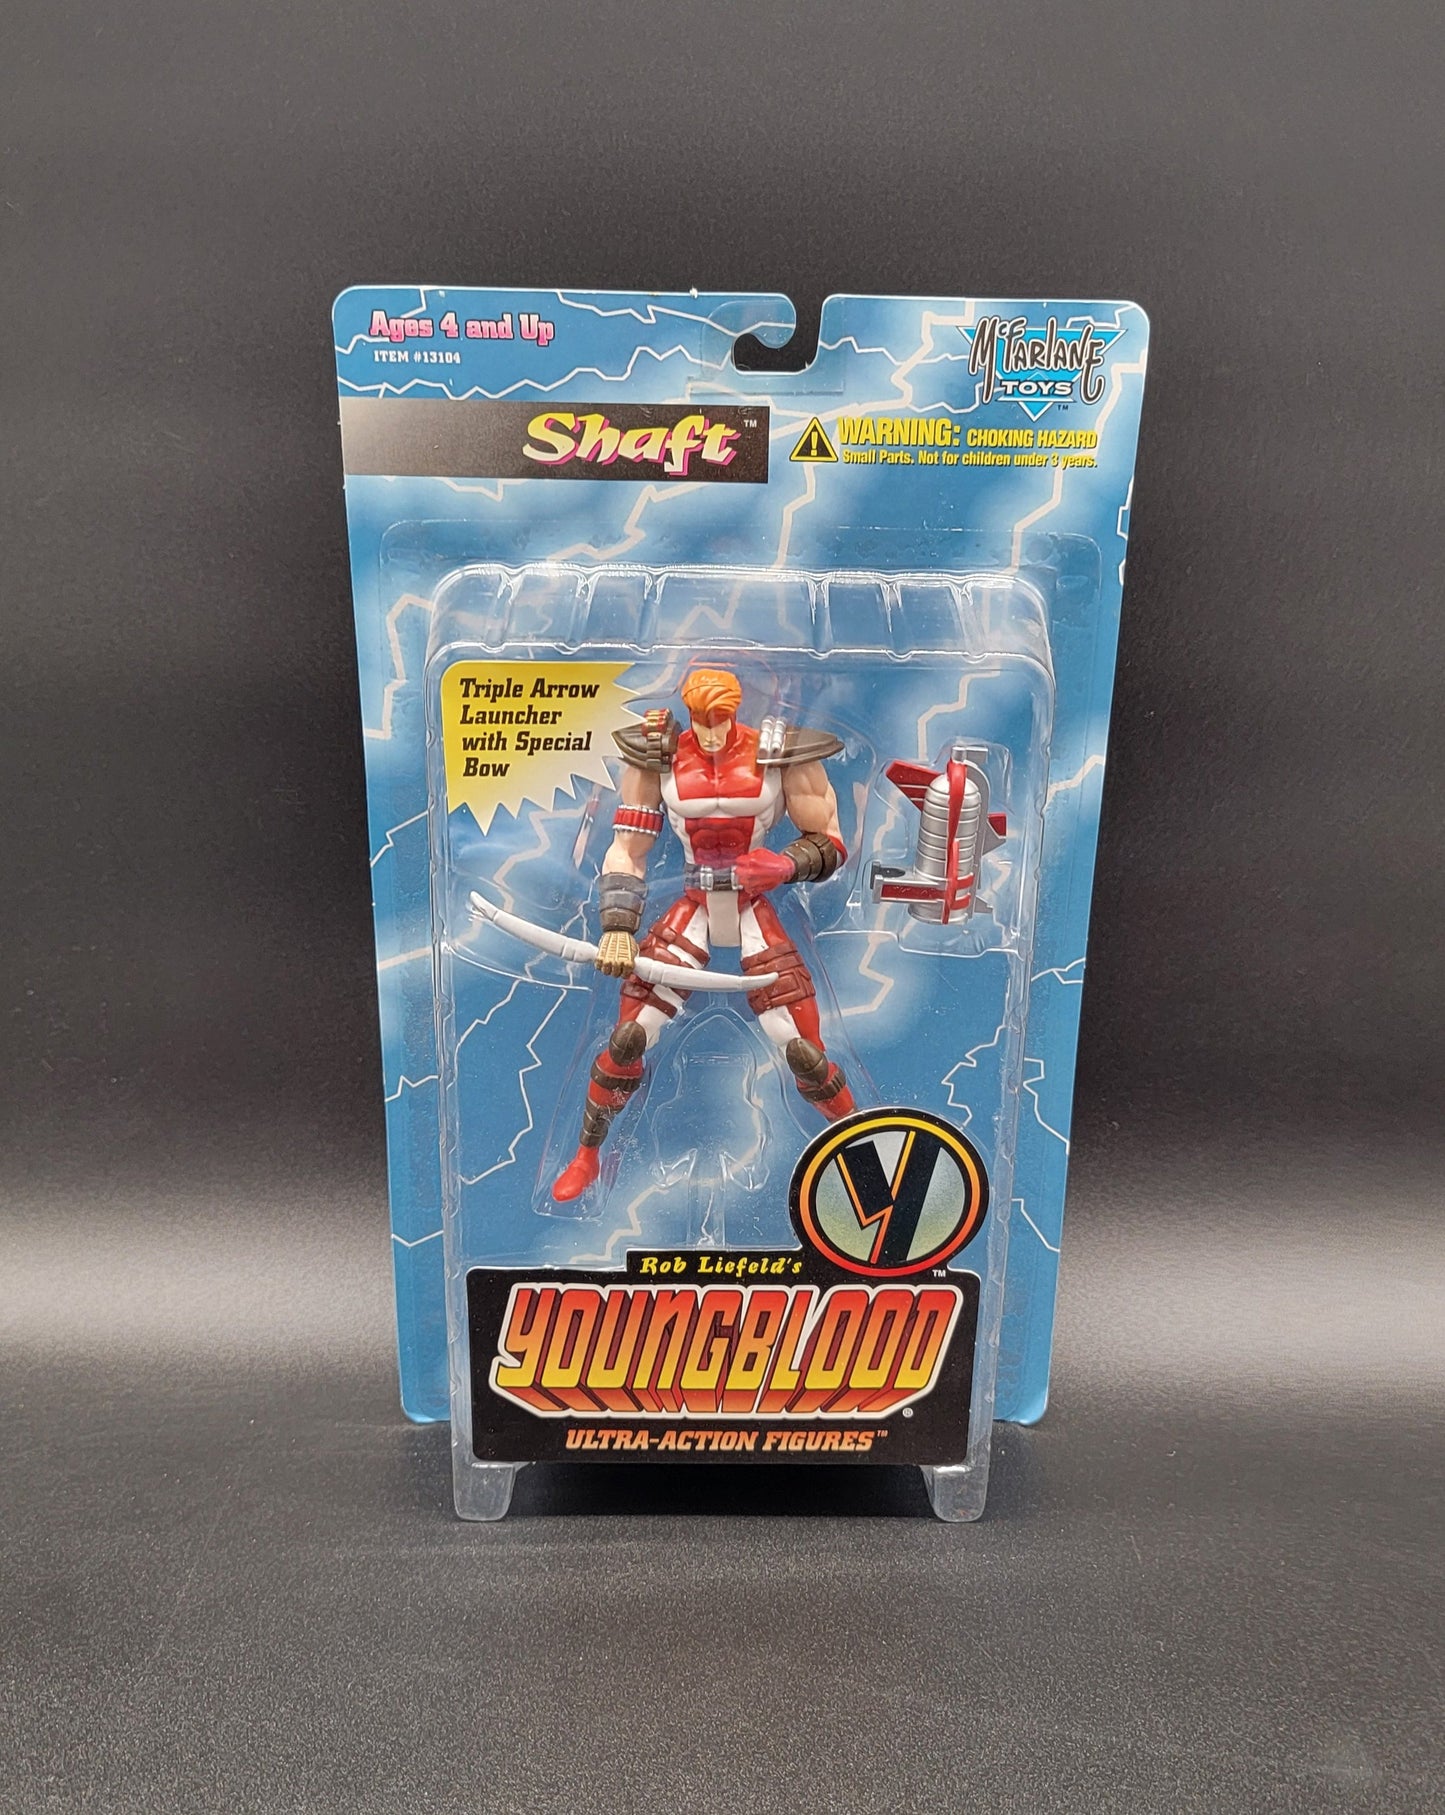 YoungBlood series 1, 5 Figures